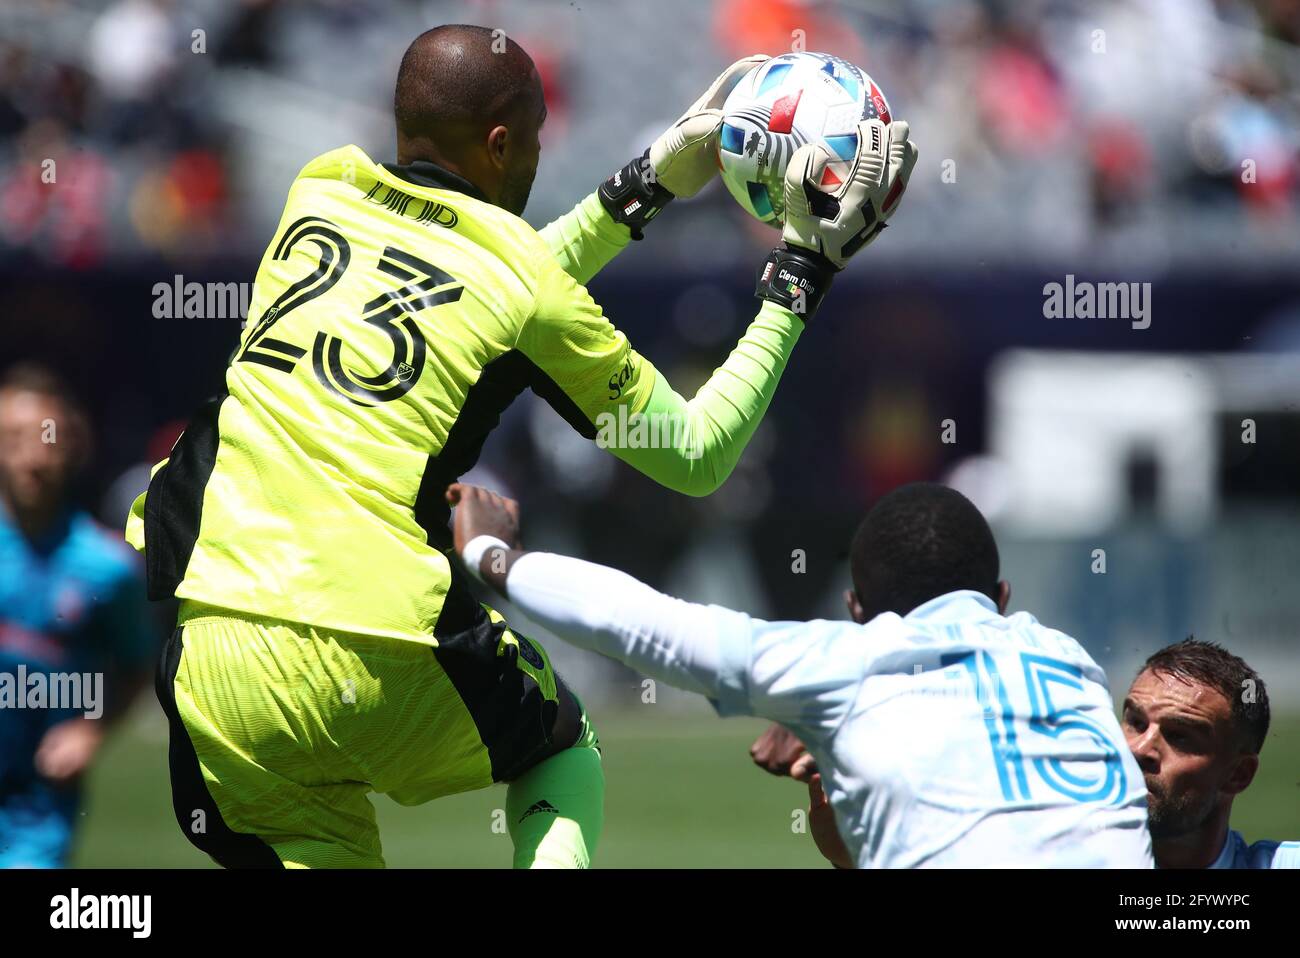 CF Montréal goalkeeper Clement Diop (23) makes a save during a MLS match against the Chicago Fire FC at Soldier Field, Saturday, May 29, 2021, in Chic Stock Photo